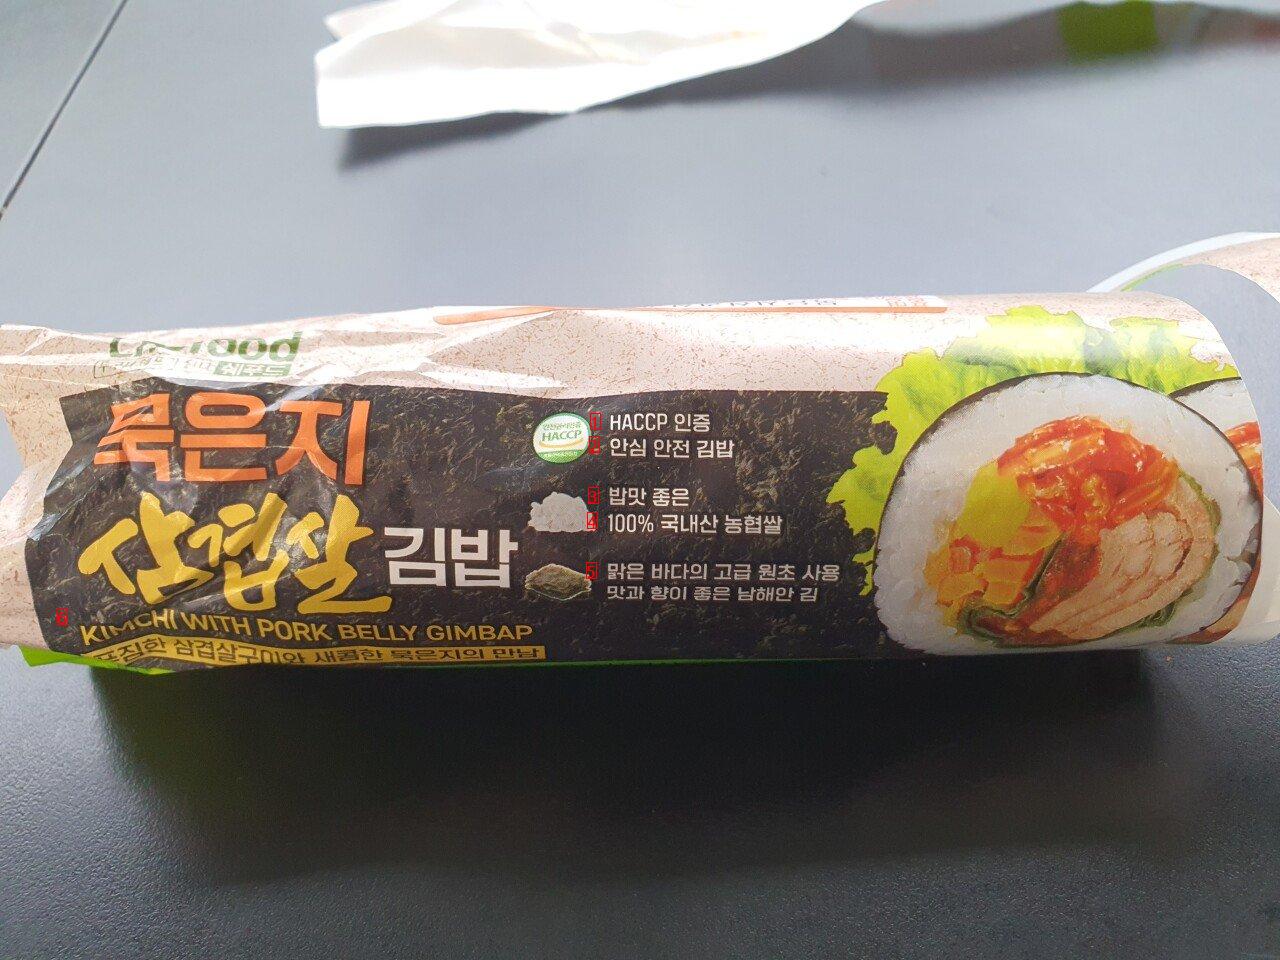 I bought kimbap, but what is this